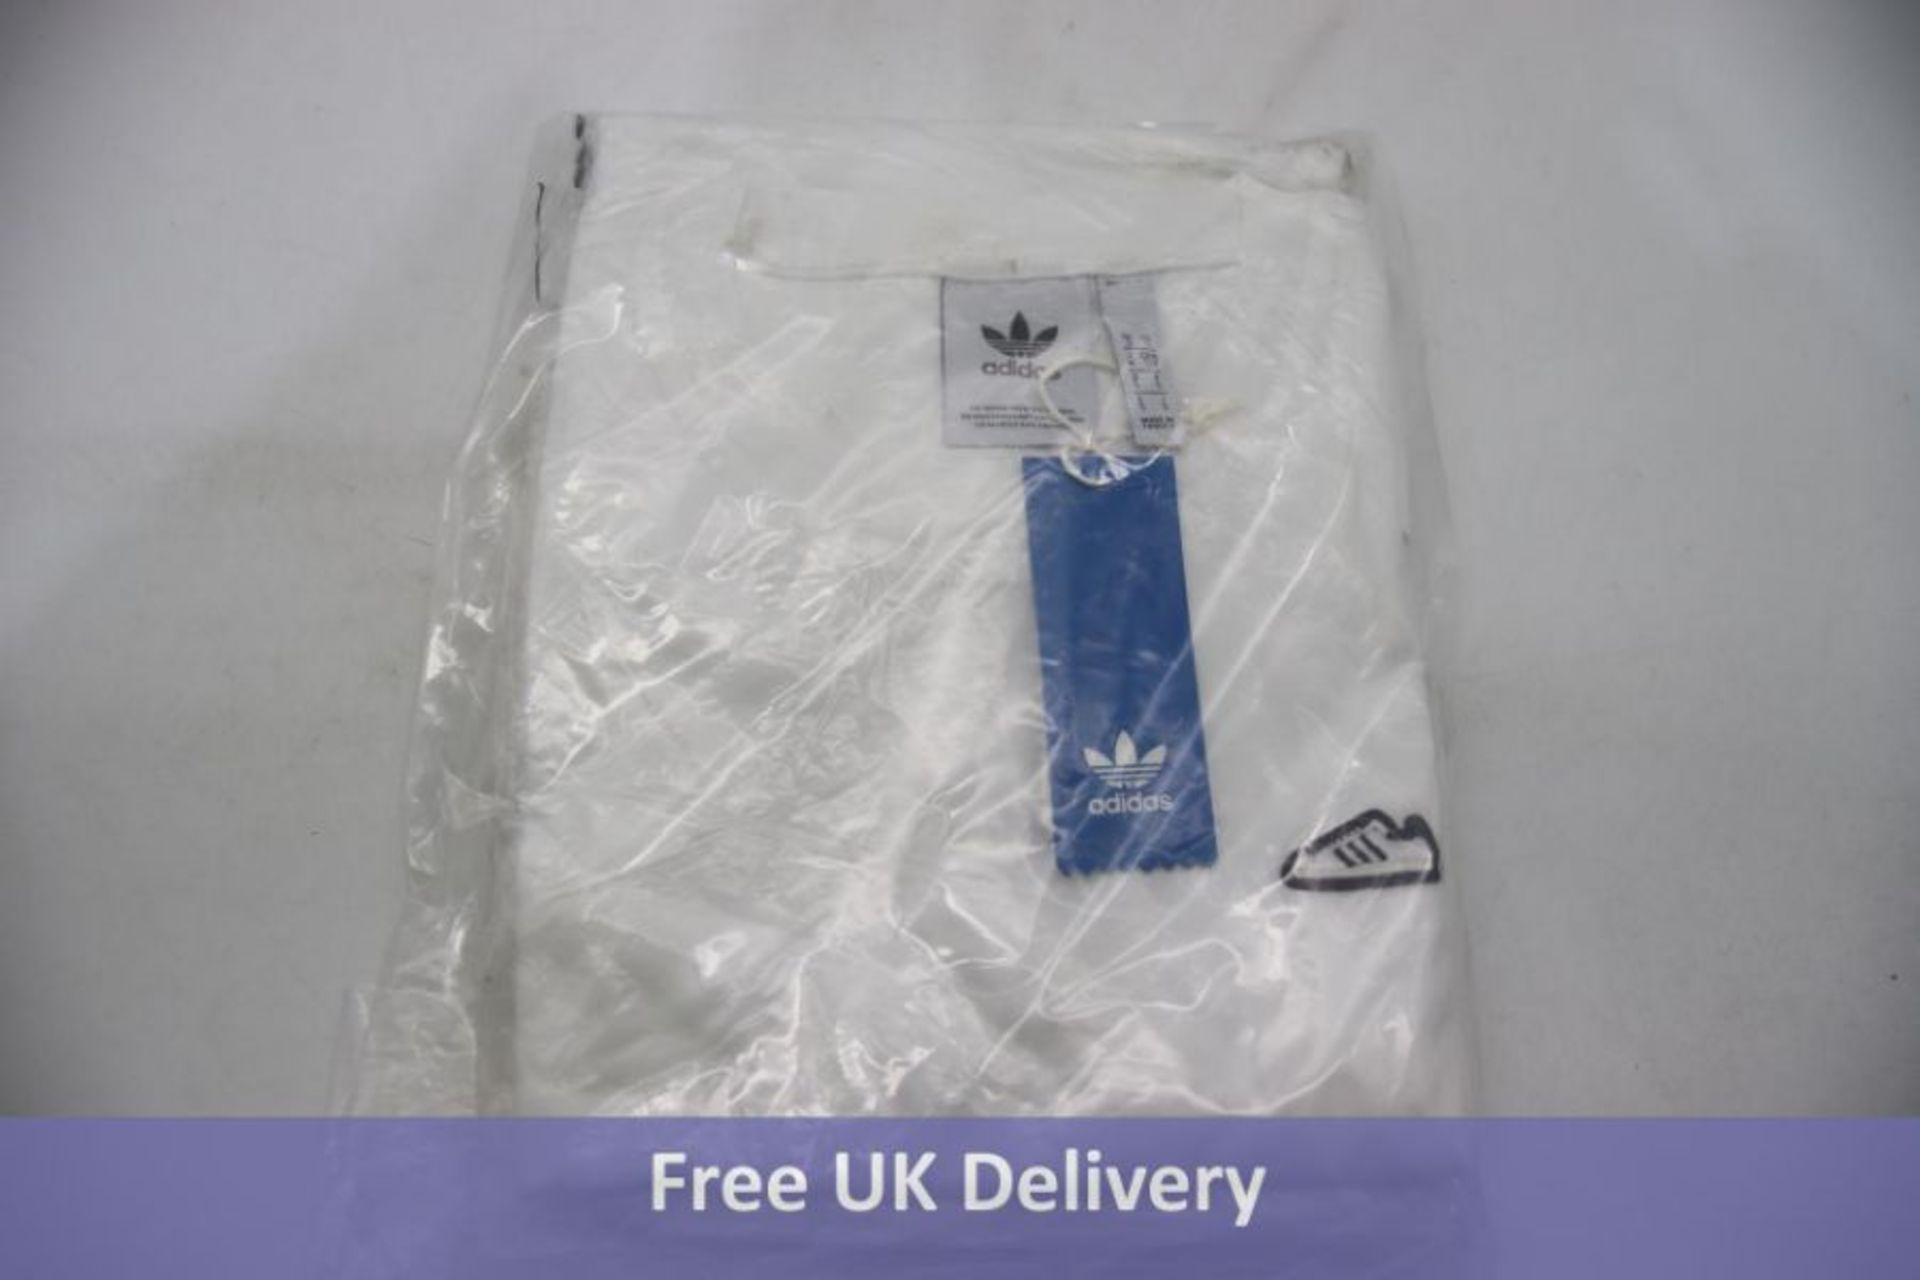 Three Adidas SST Embroidered T-Shirts, White, Size S